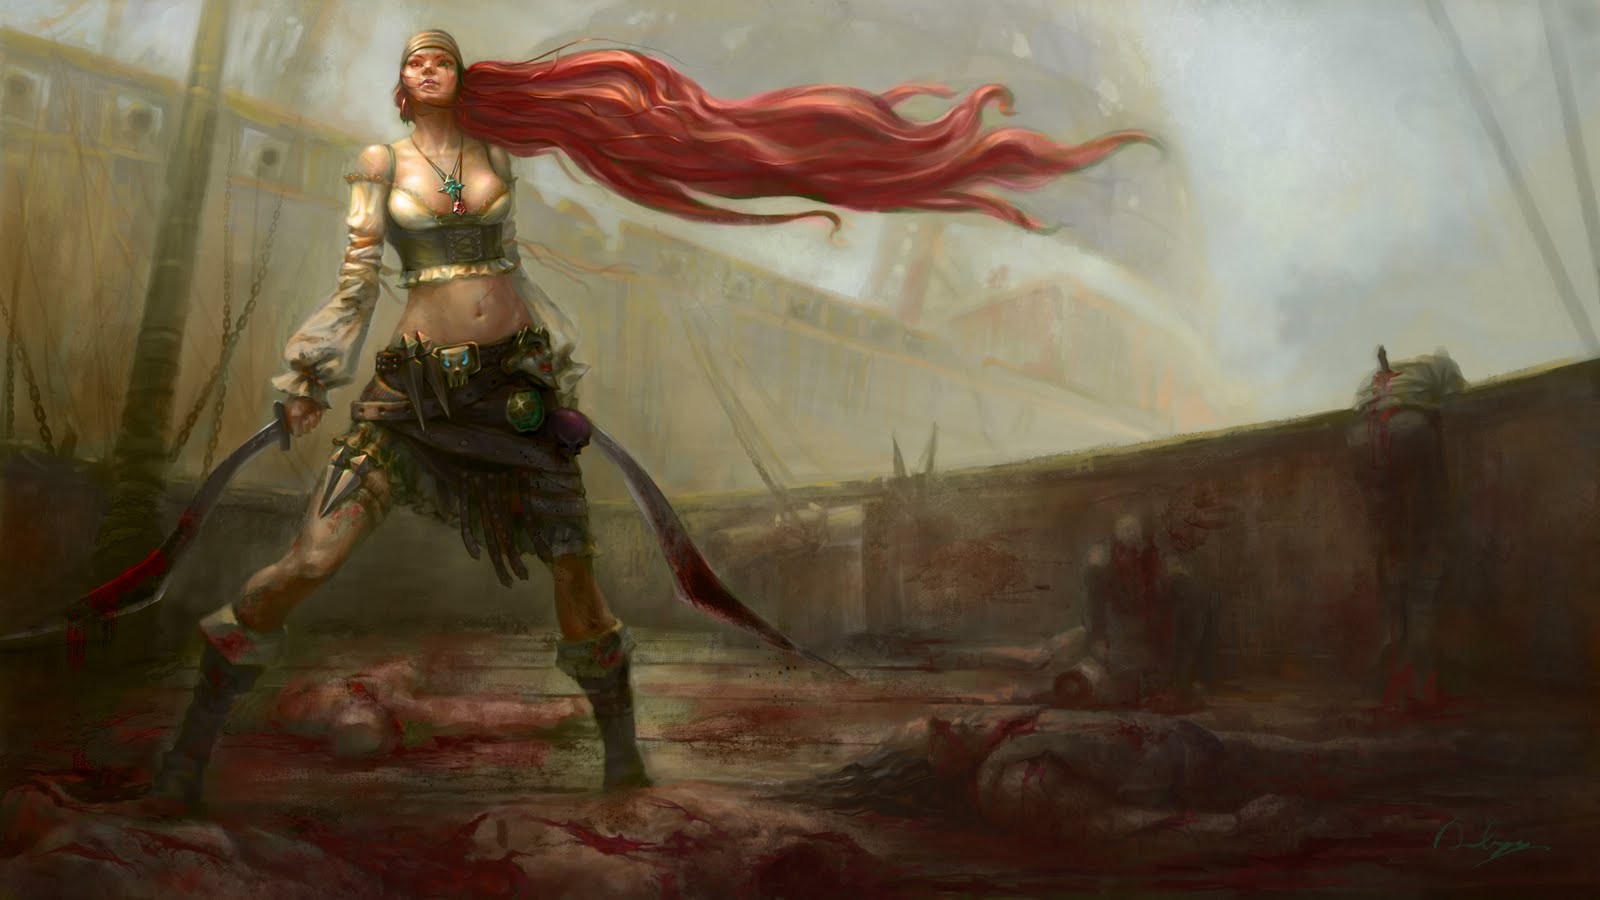 General 1600x900 fantasy girl blood necklace redhead long hair PC gaming belly weapon fantasy art video game warriors Janissa the Widowmaker video game art video game girls boobs standing women with swords sword League of Legends Katarina (League of Legends) digital art